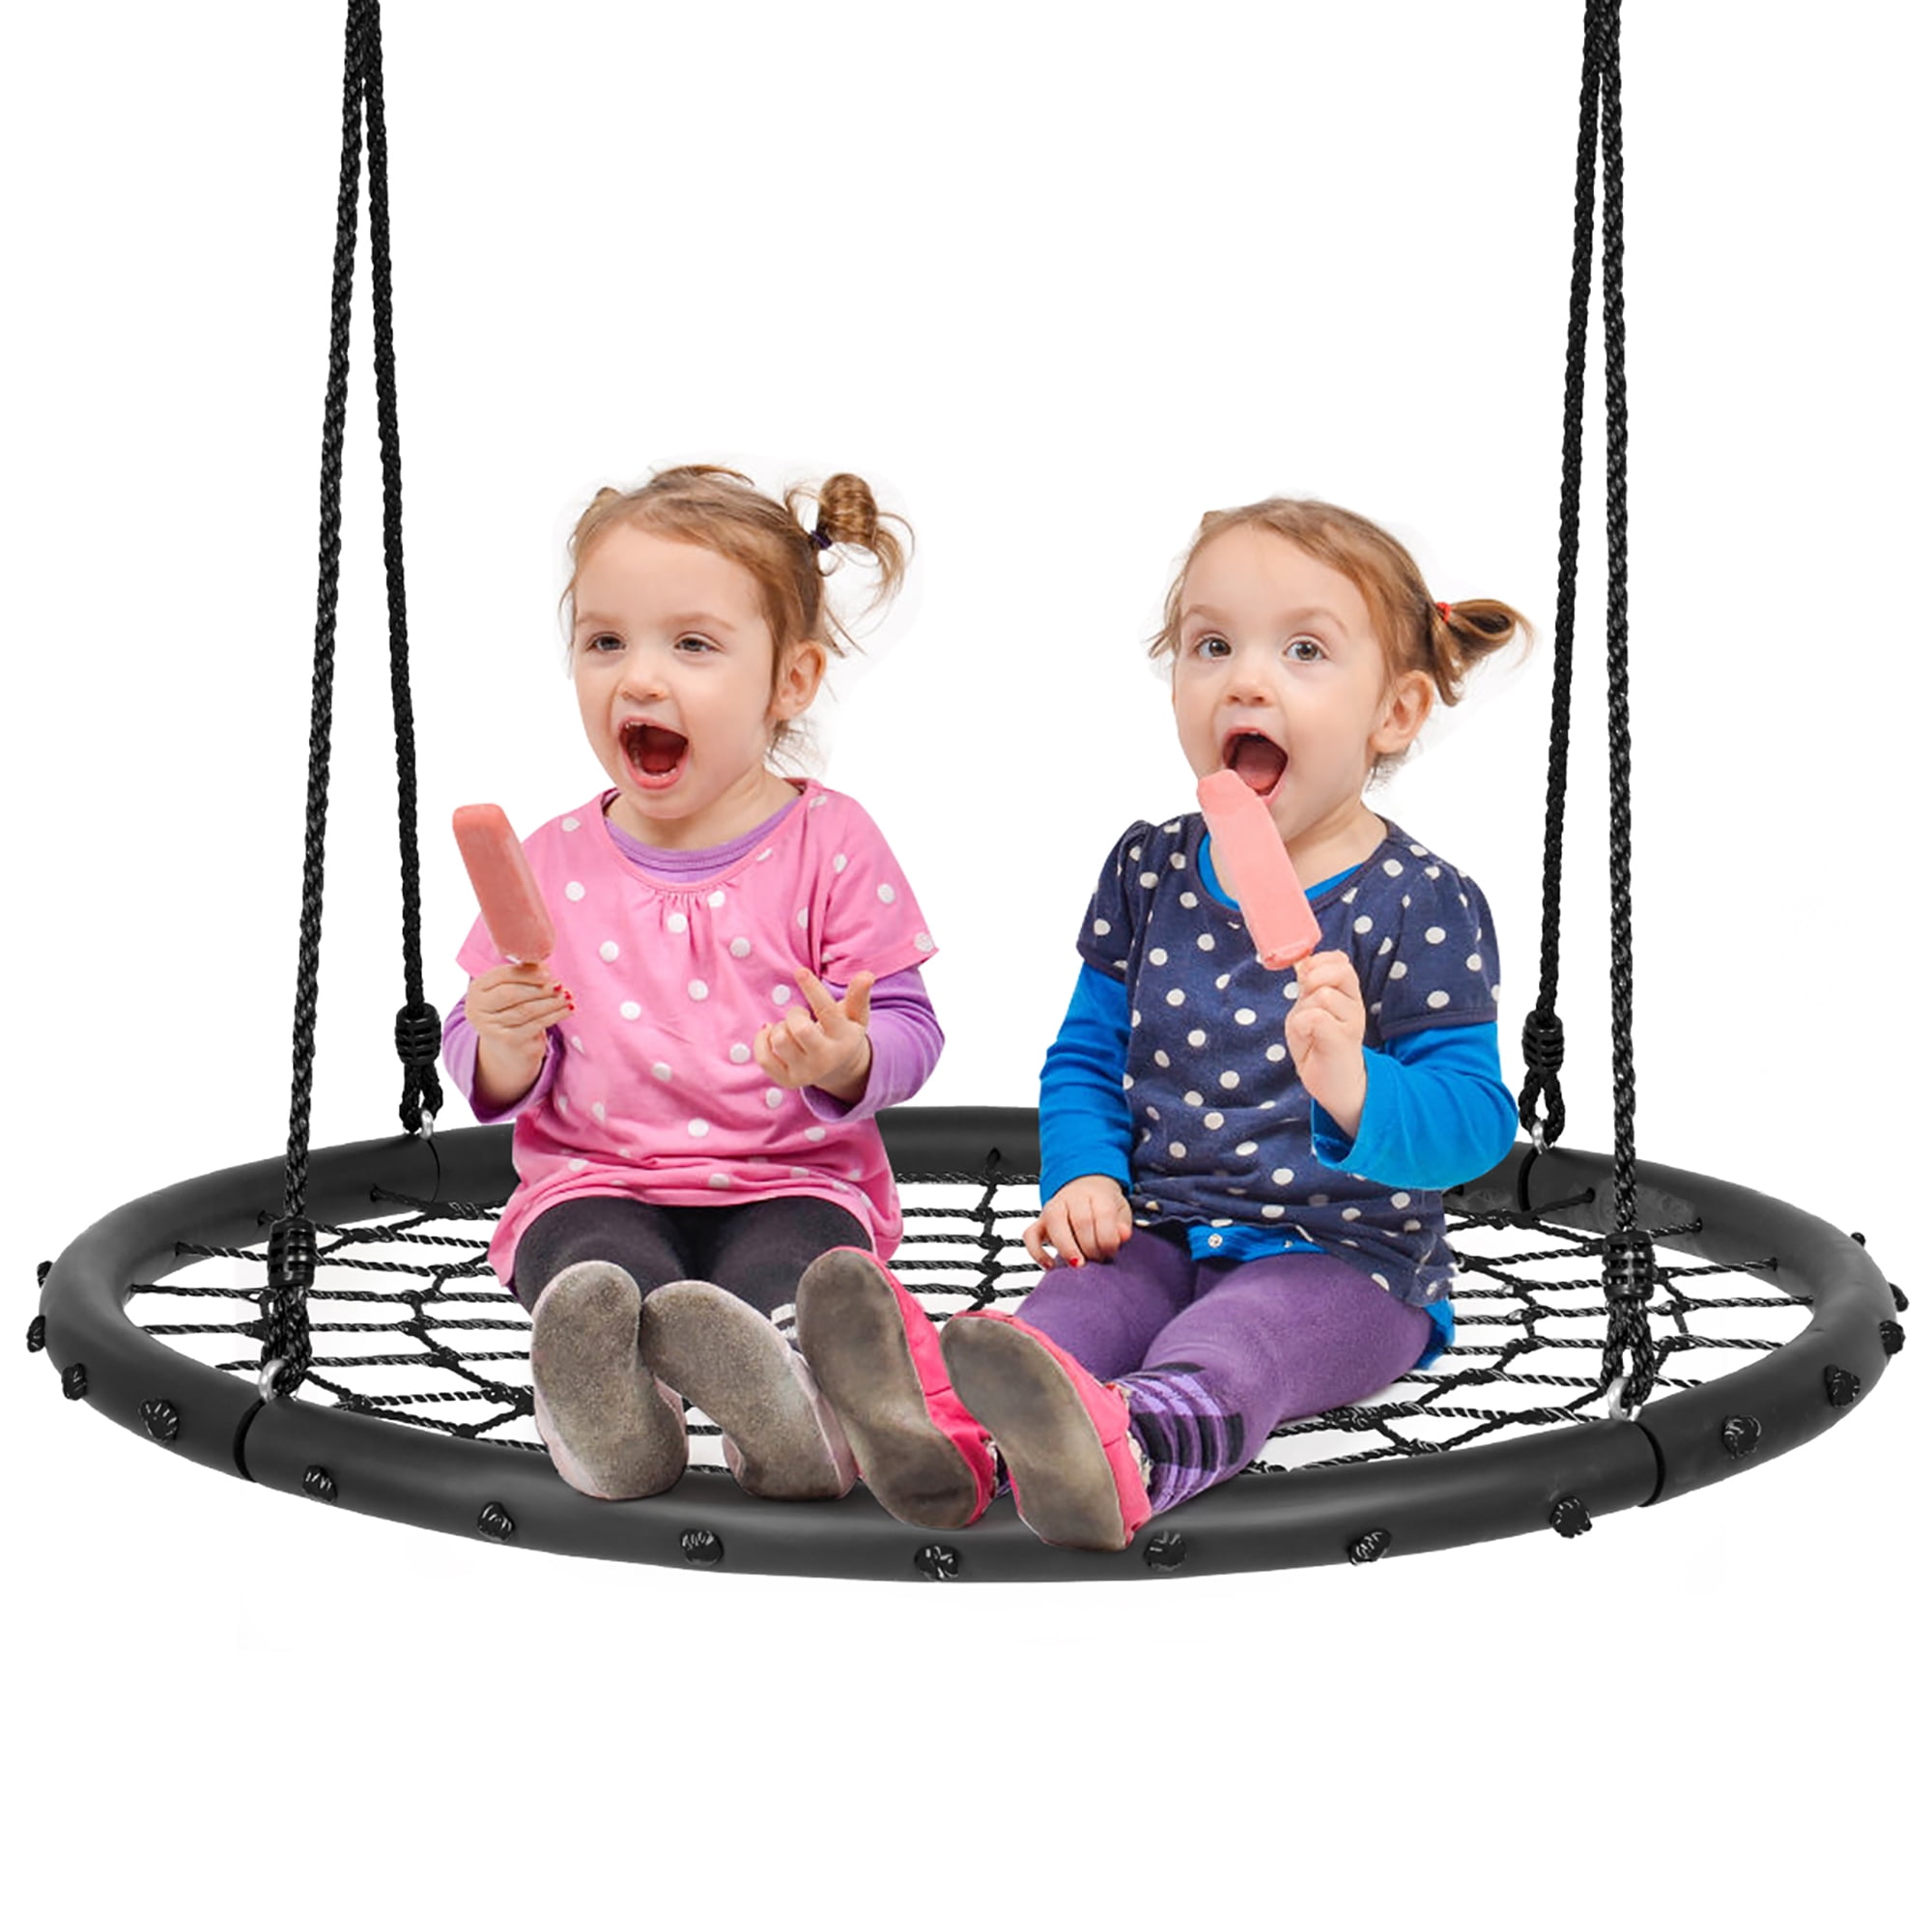 Adjustable Detachable Nylon Rope & 2 Carabiners,Kids Indoor/Outdoor Round Web Swing 600 lb Weight Capacity,Durable Steel Frame 40 Spider Web Tree Swing Great for Tree,Backyard,Playground,Playroom 